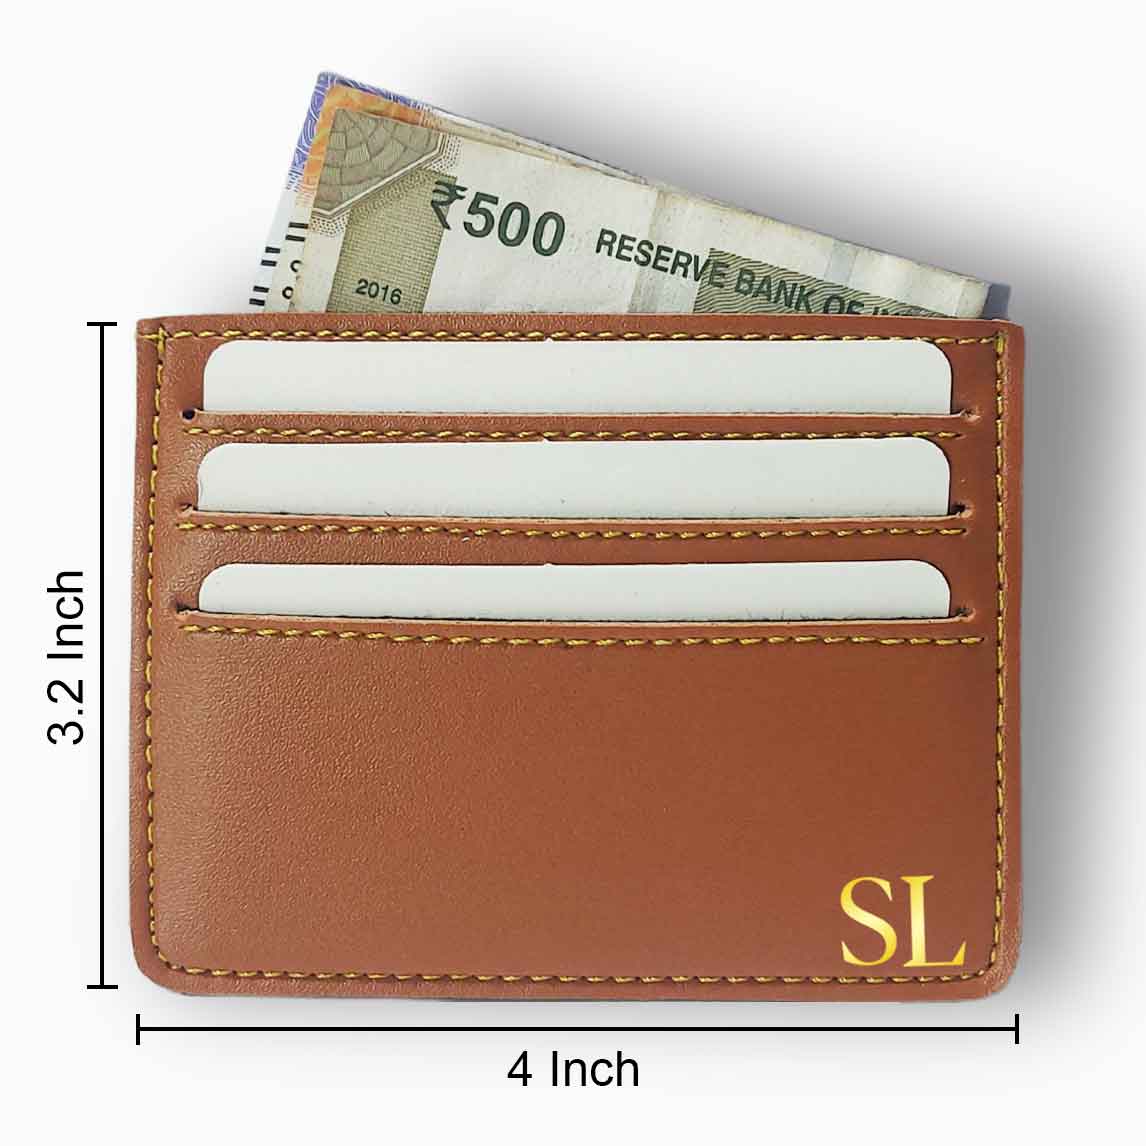 Customized Business Card Organizer Add Initials for Men - Brown Nutcase